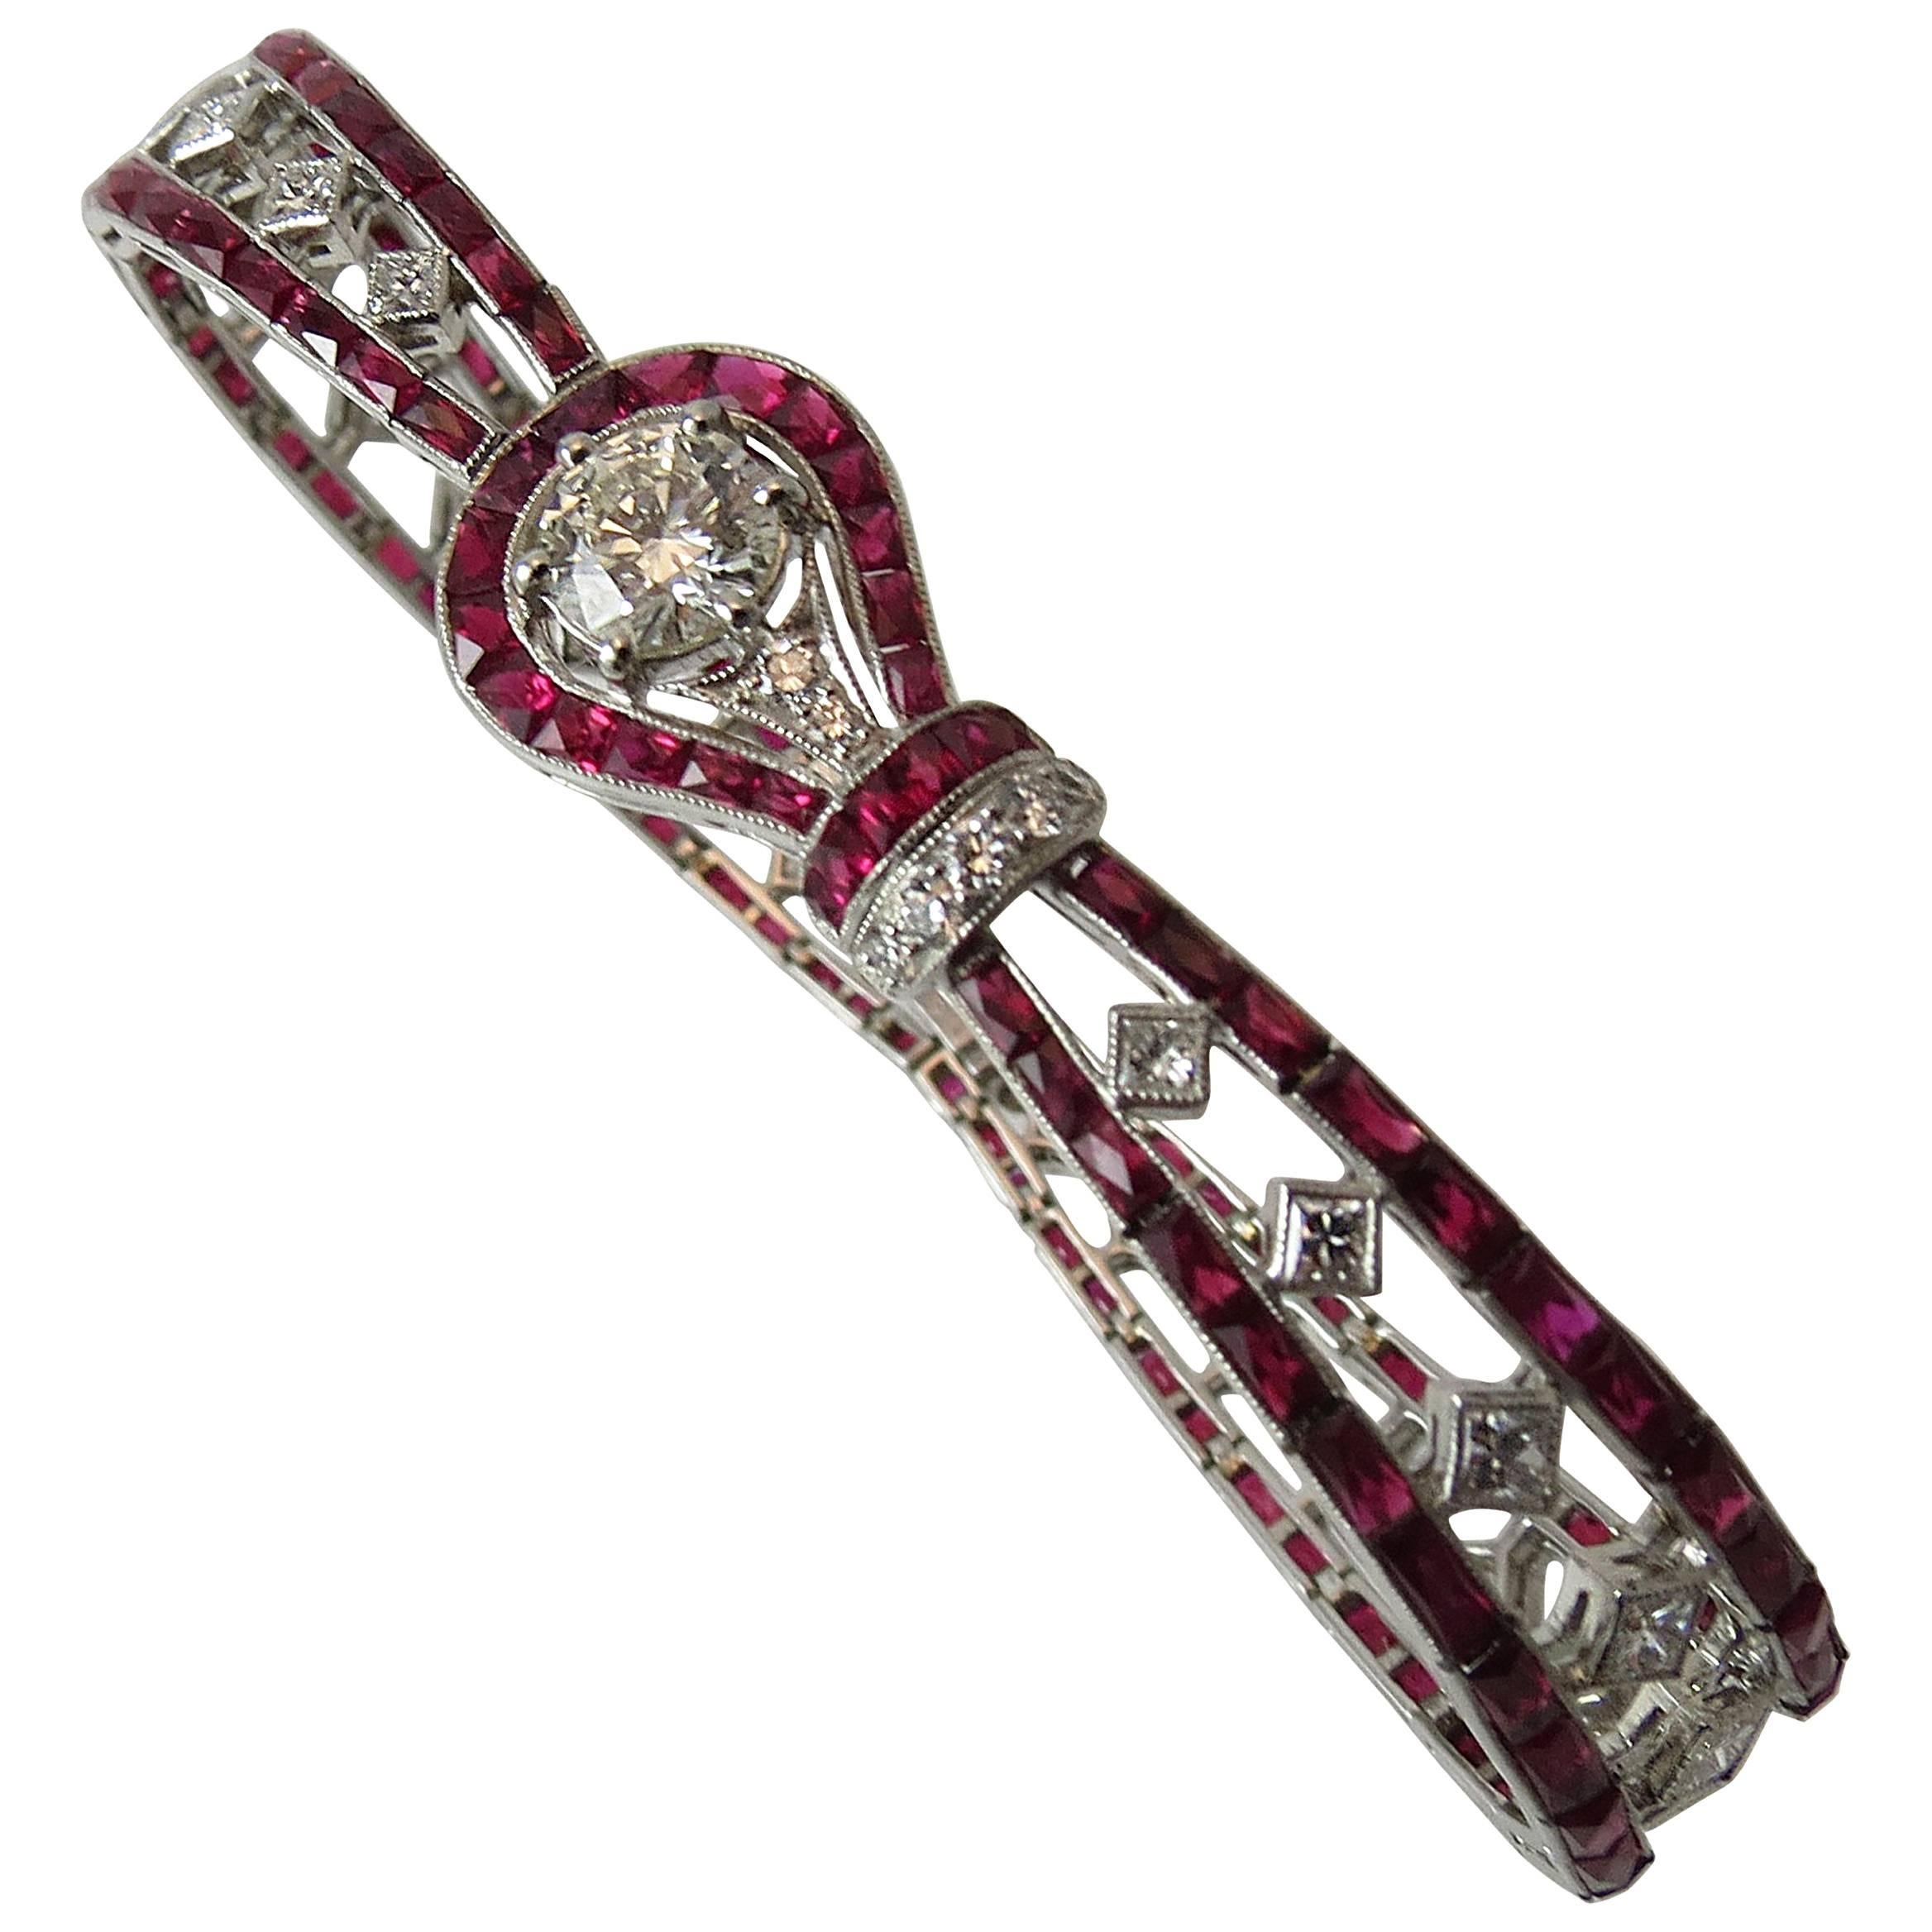 Vintage style platinum bracelet set with 126 rubies weighing 16.67cts and 36 round and princess cut diamonds weighing 1.81cts (center diamond weighs .74cts additional, GH color, SI clarity)